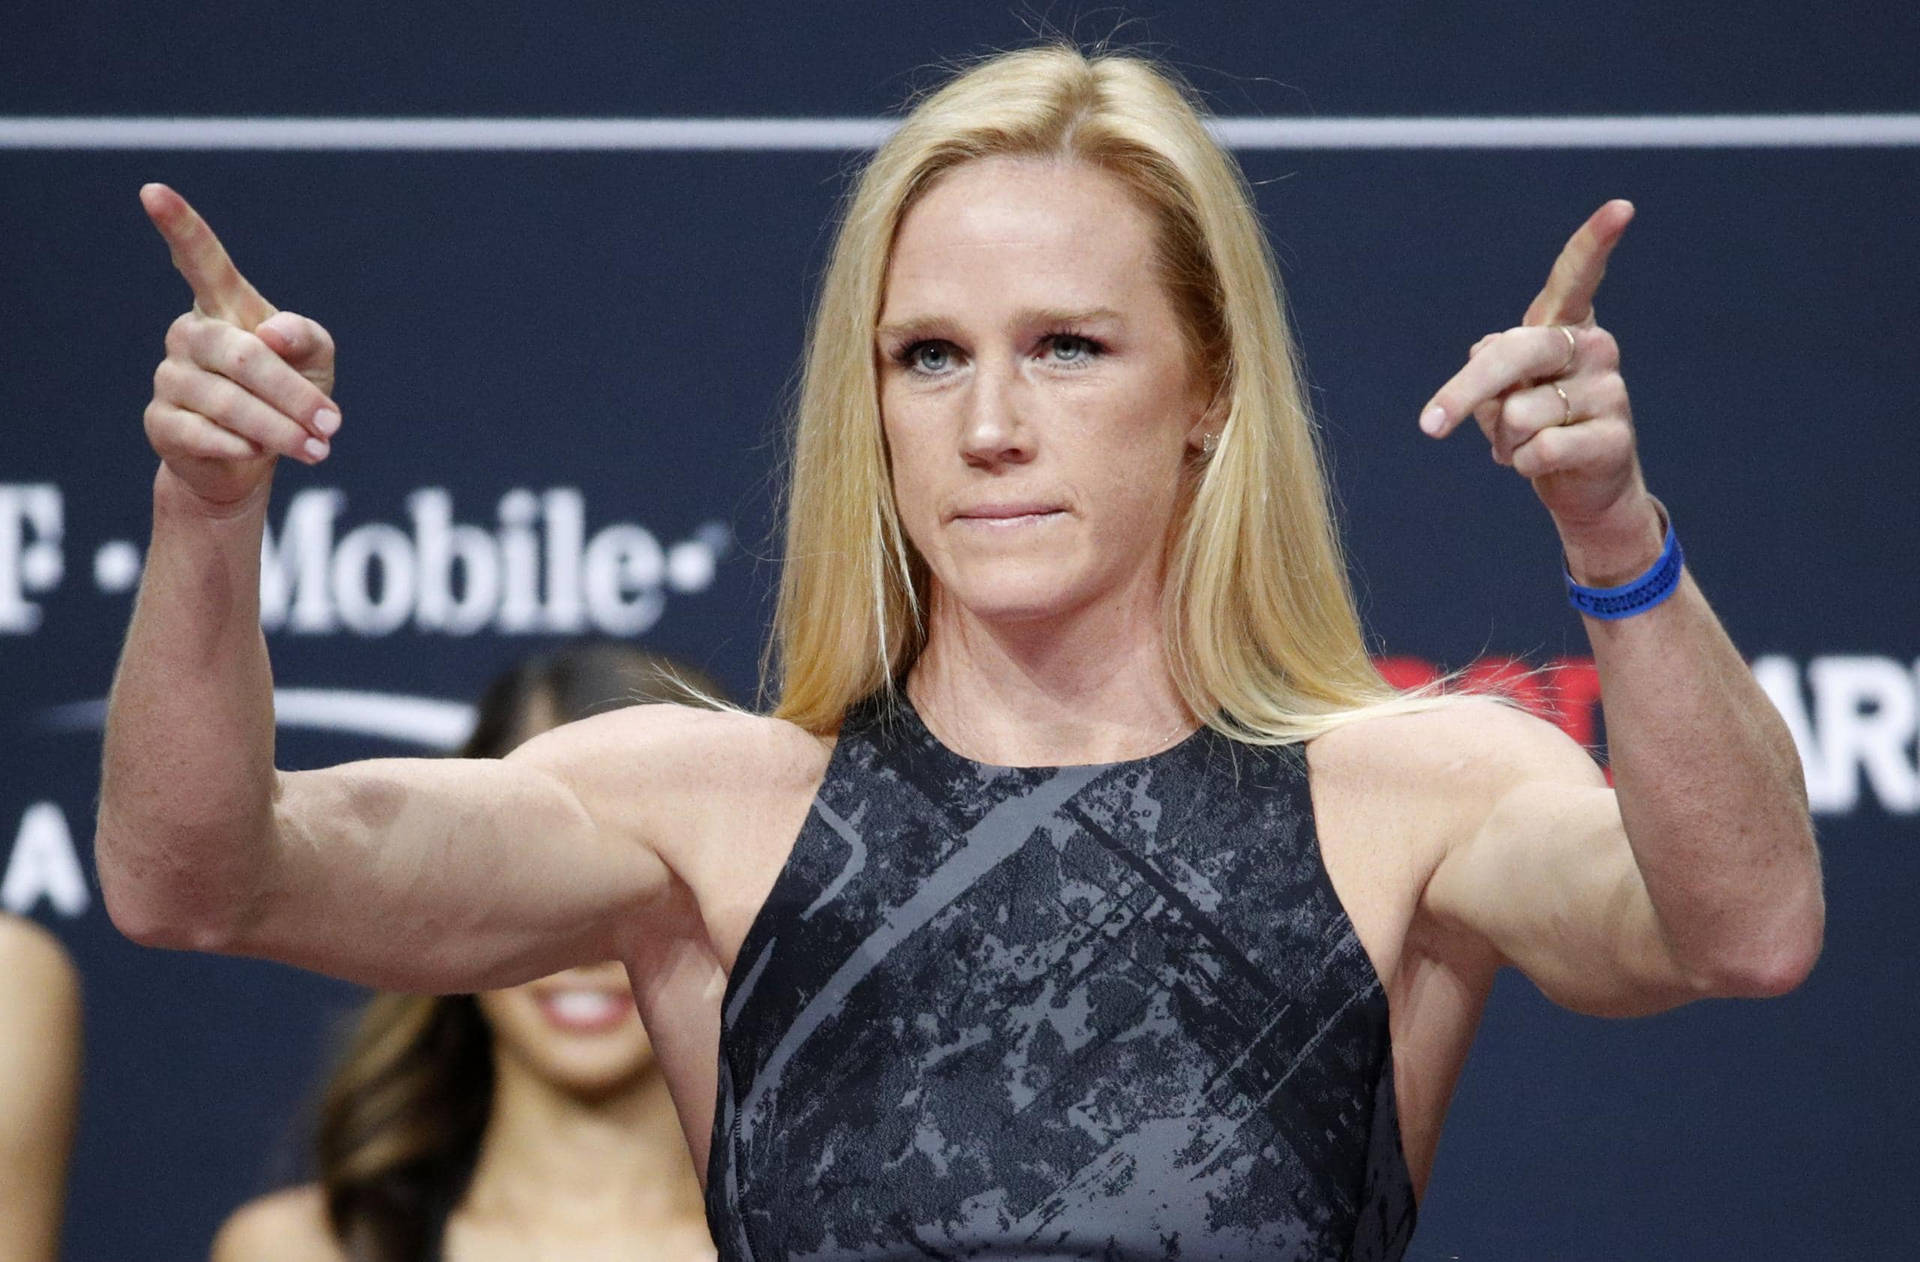 Hollyholm Cool Pose Would Be Translated As 